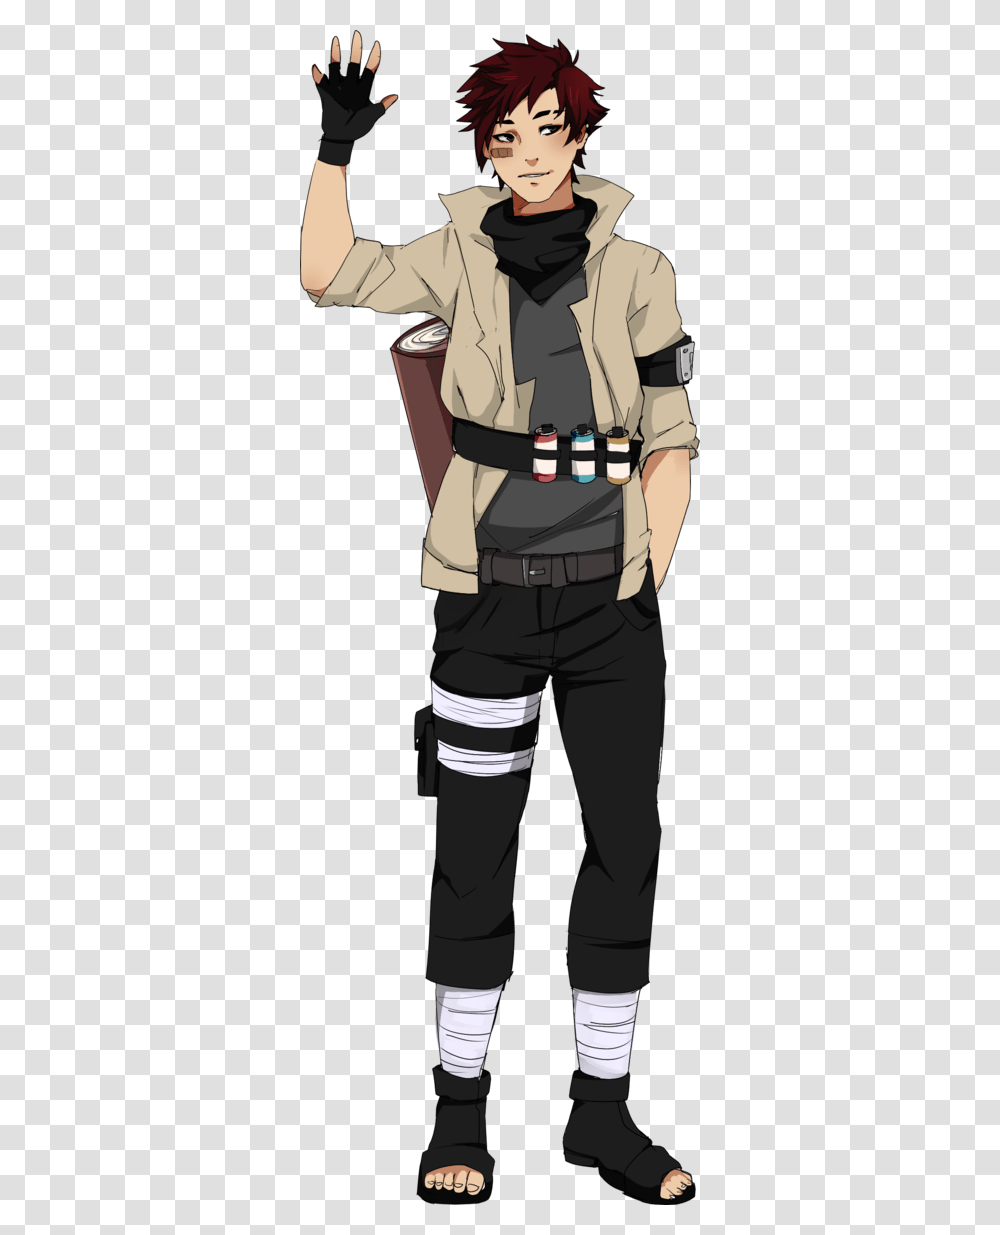 Anime Naruto Oc Male, Person, Military Uniform, Police, Officer Transparent Png